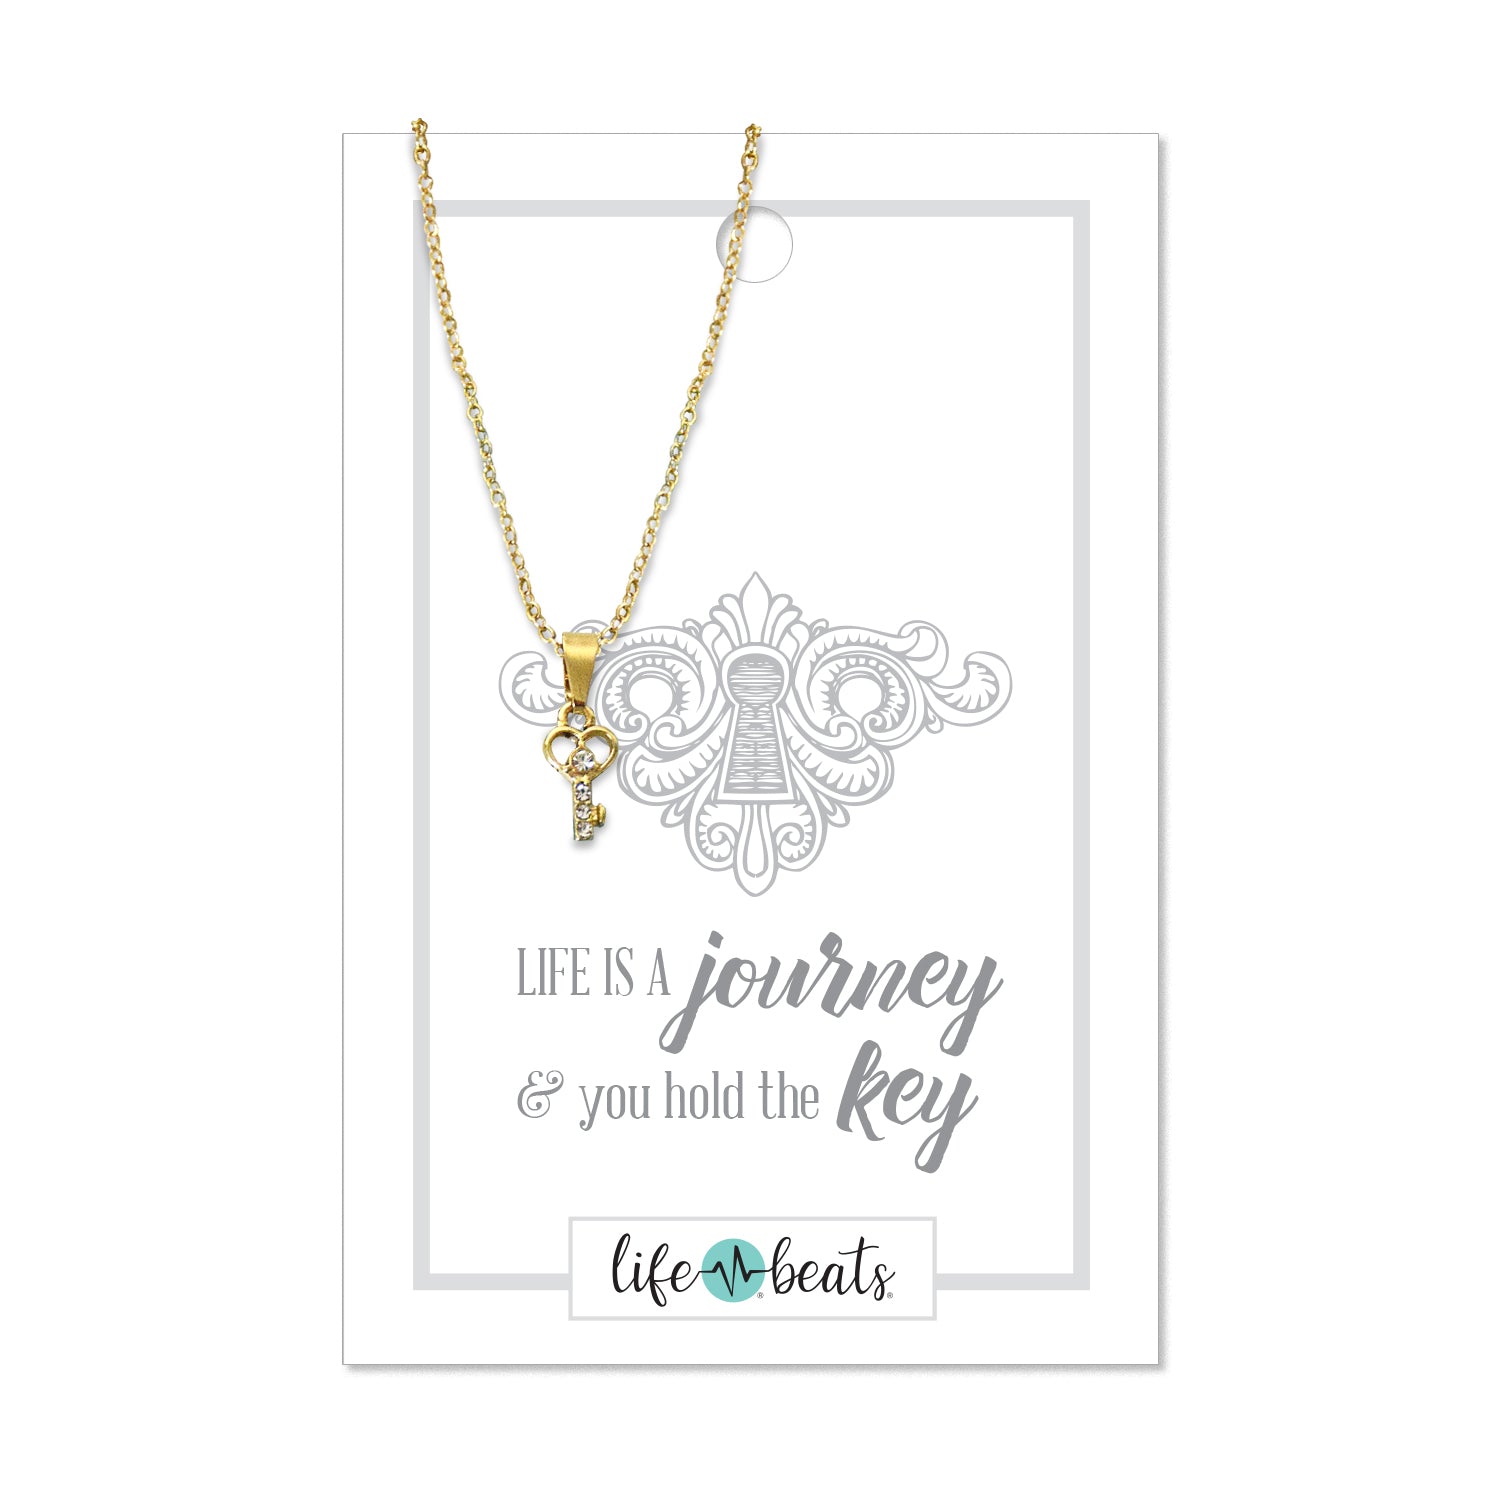 LifeBeats  Inspirational Jewelry and Gift Products to Help You